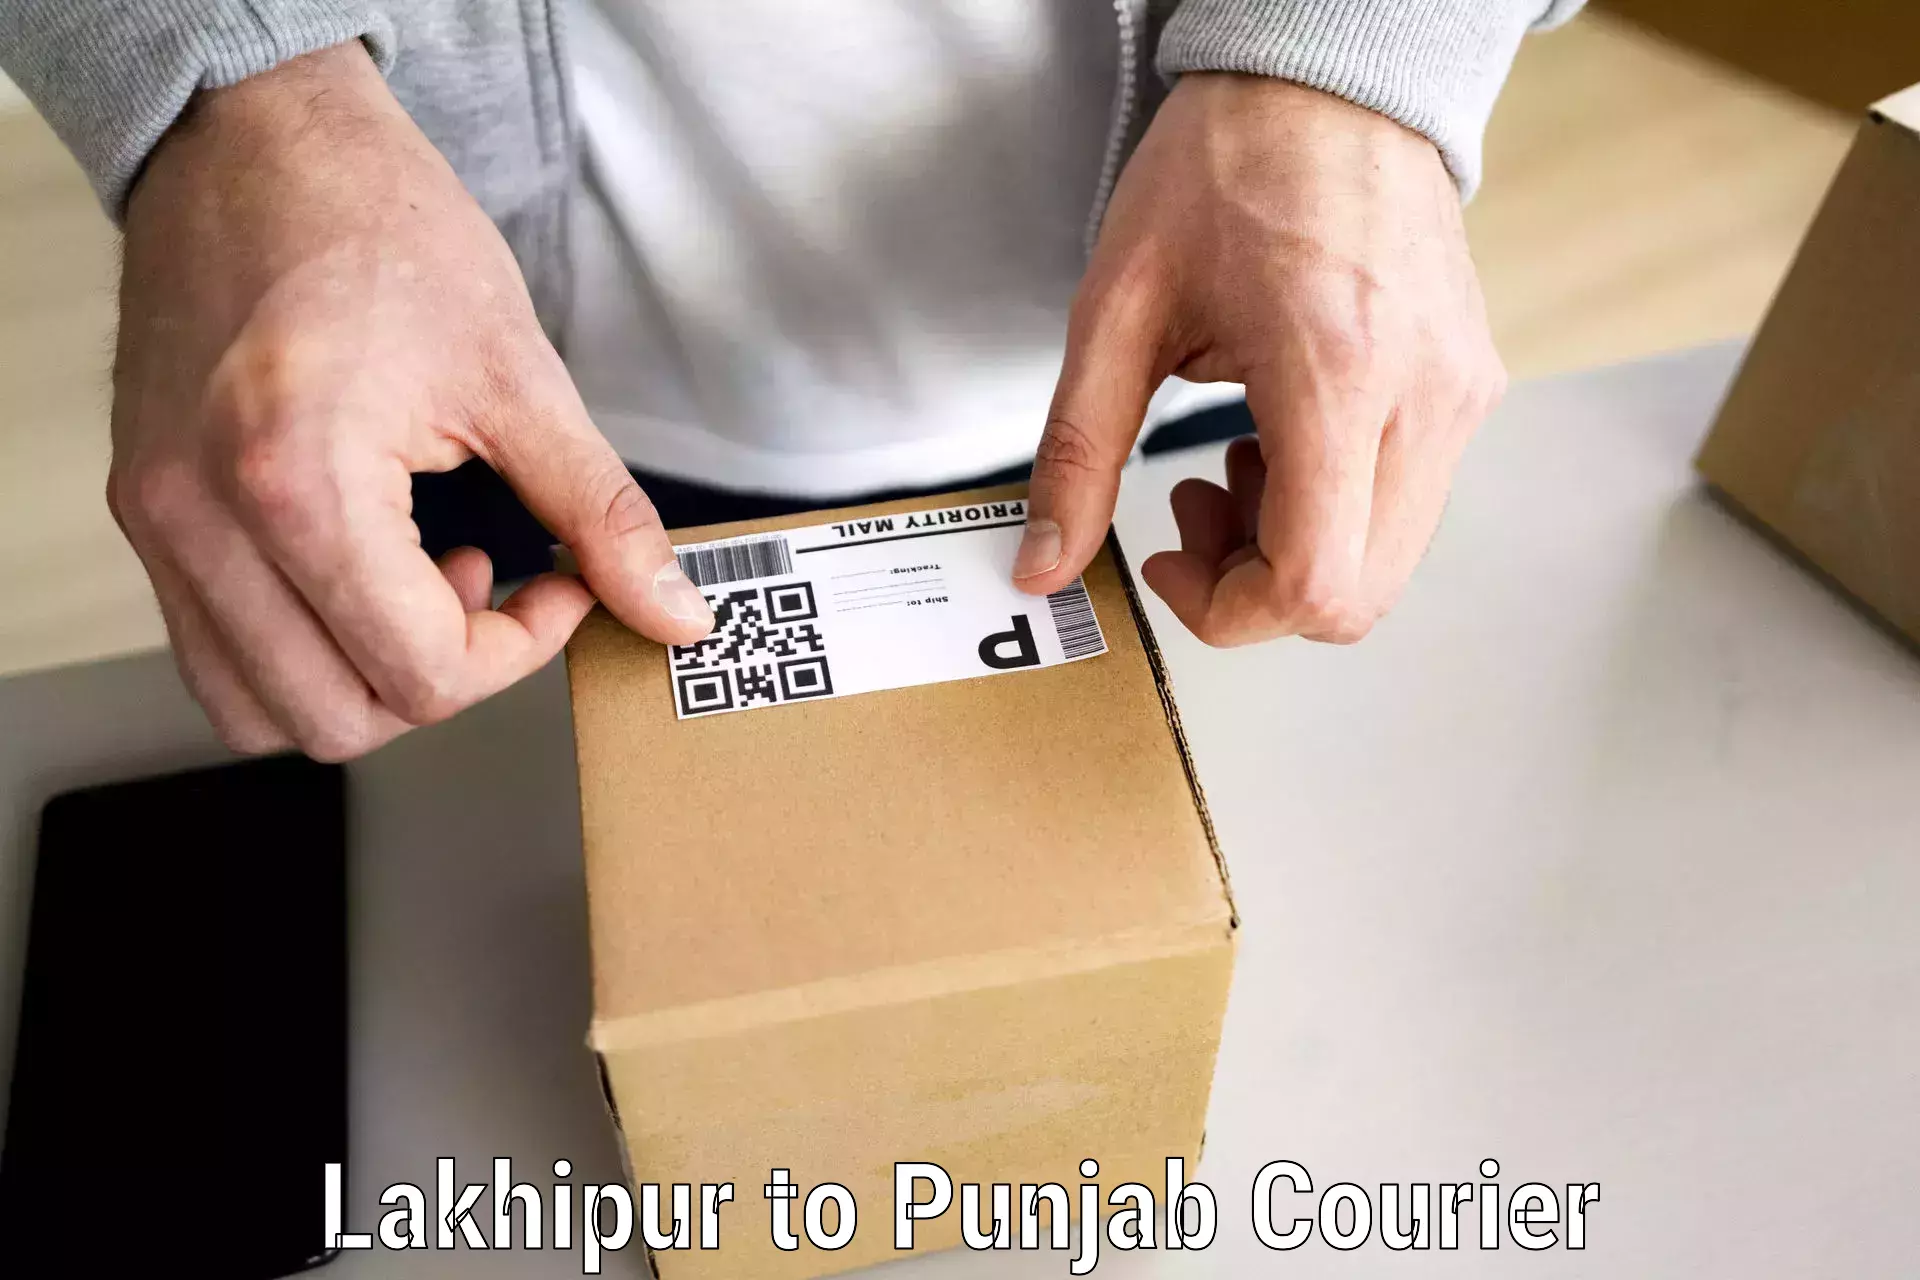 Full-service movers in Lakhipur to Firozpur